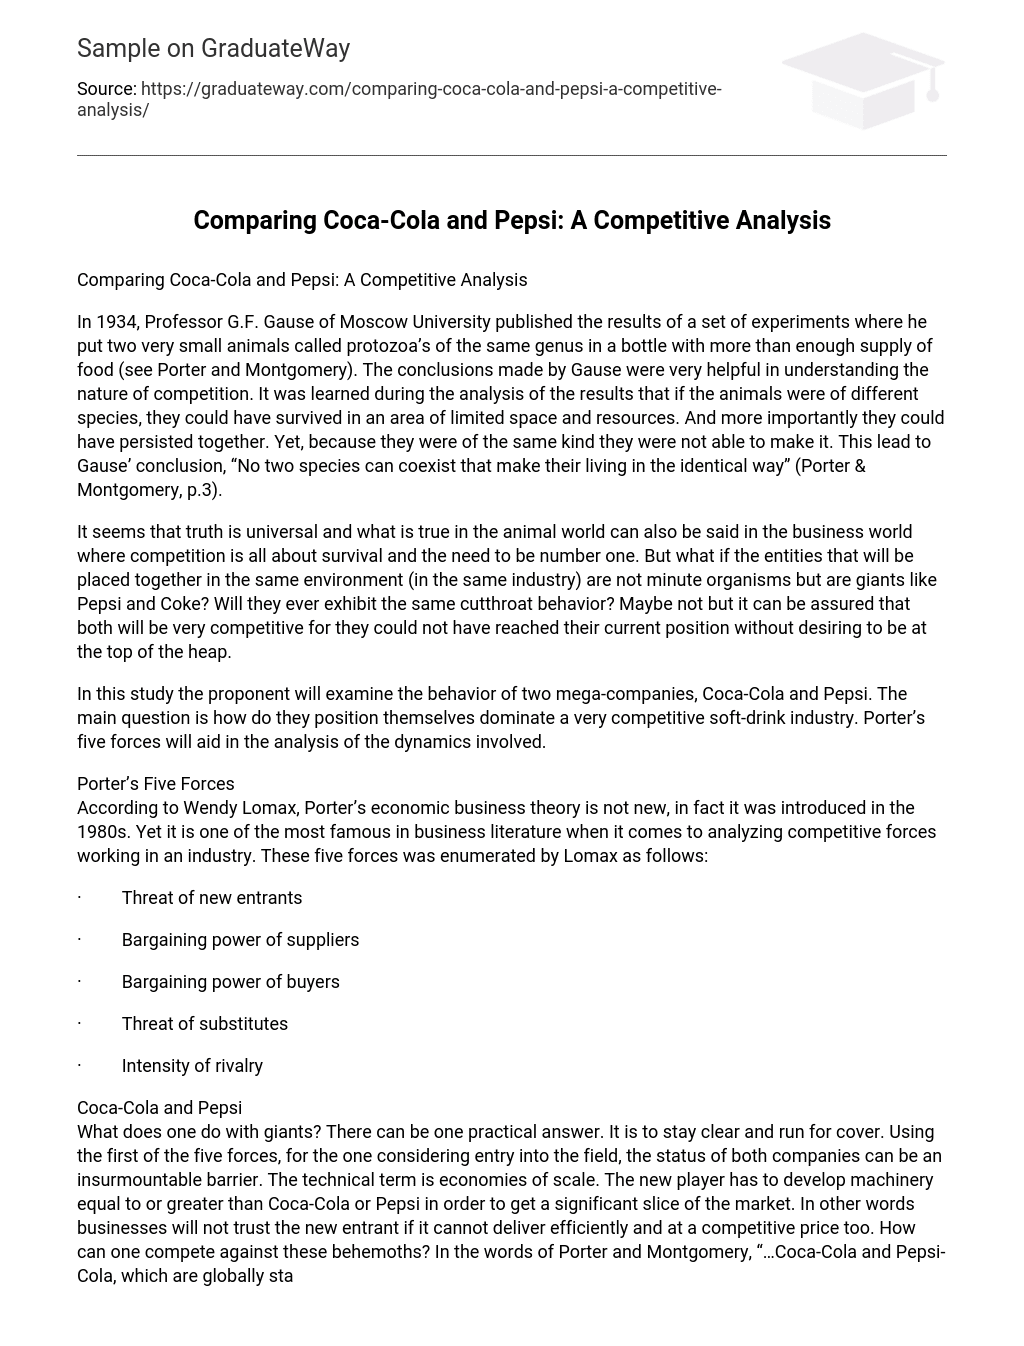 Comparing Coca-Cola and Pepsi: A Competitive Analysis